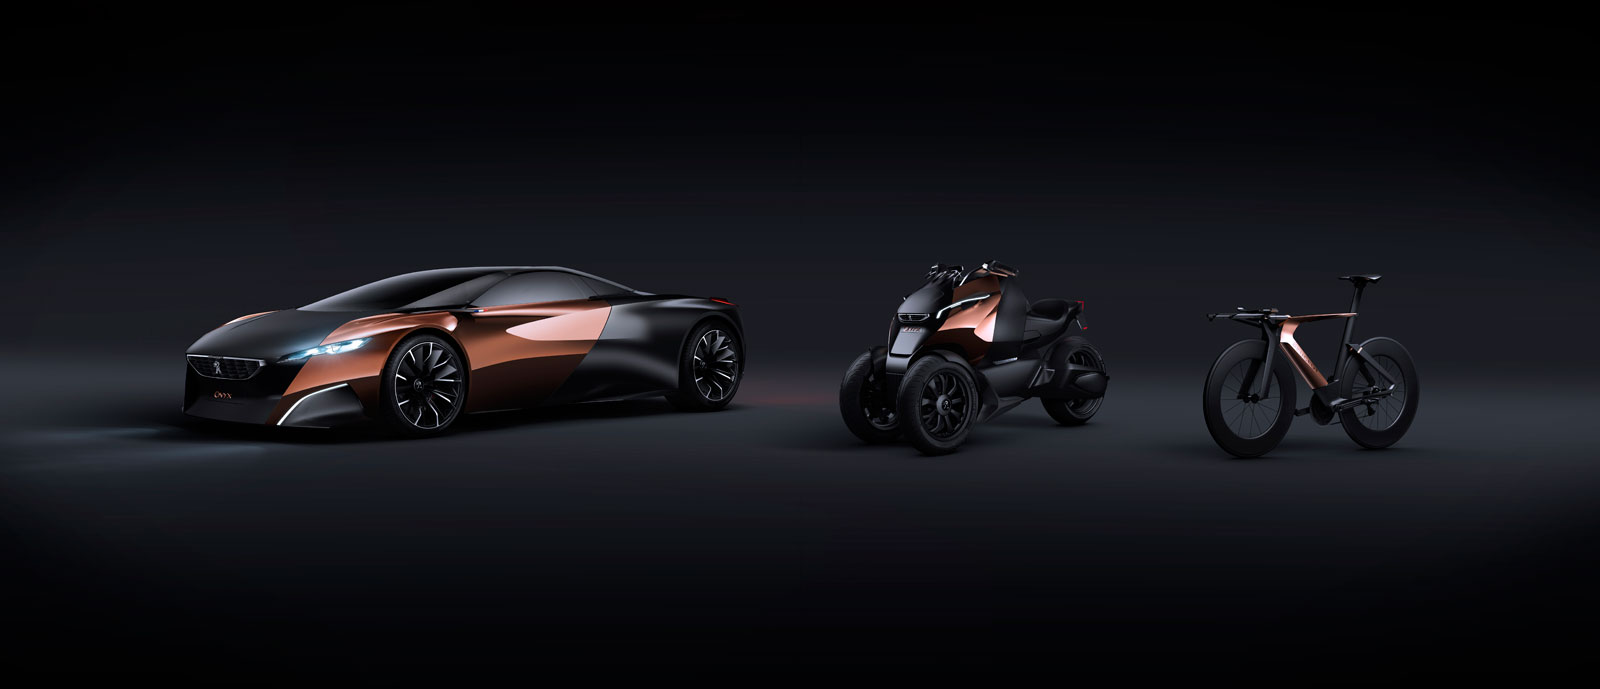 Peugeot Onyx Concepts, 2012 - Car, Scooter and Bike